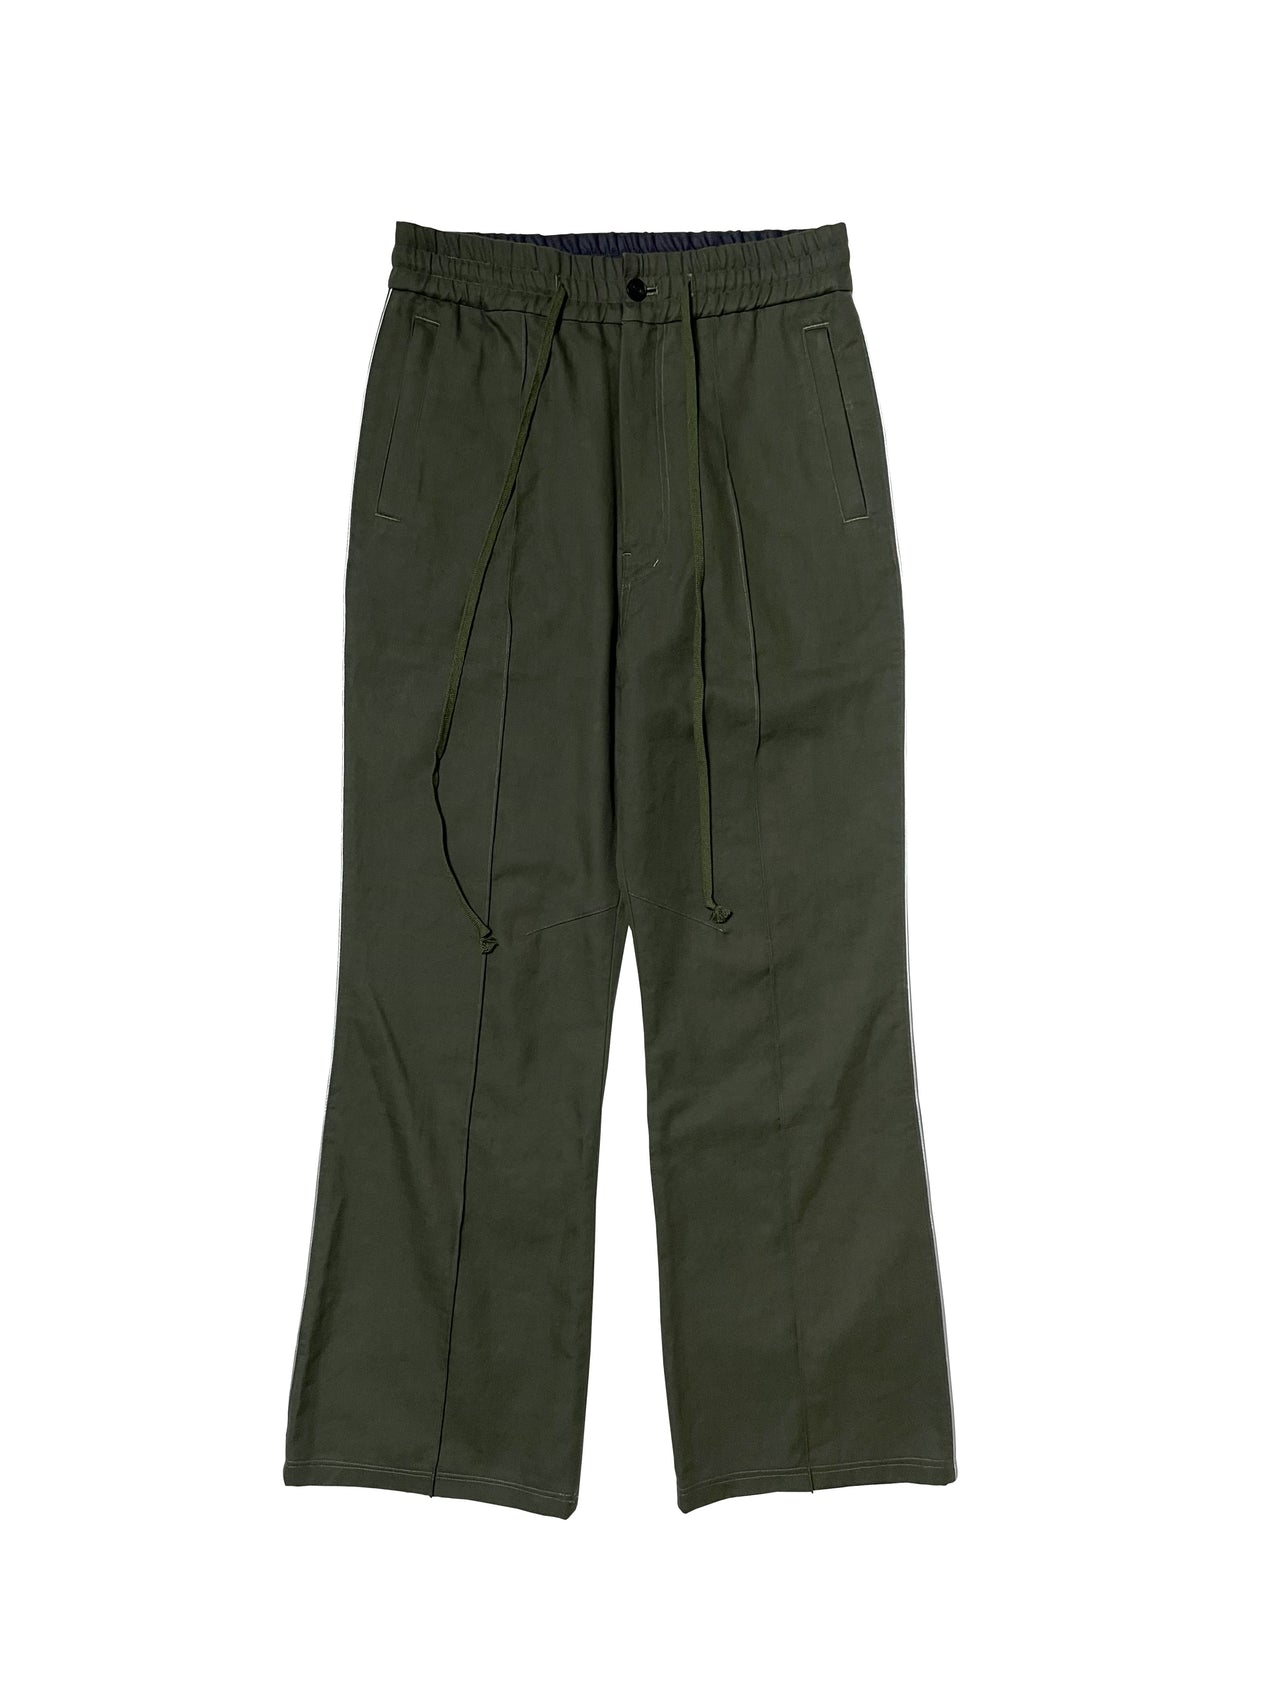 MIRA COTTON LOUNGE TROUSERS in HUNTER GREEN